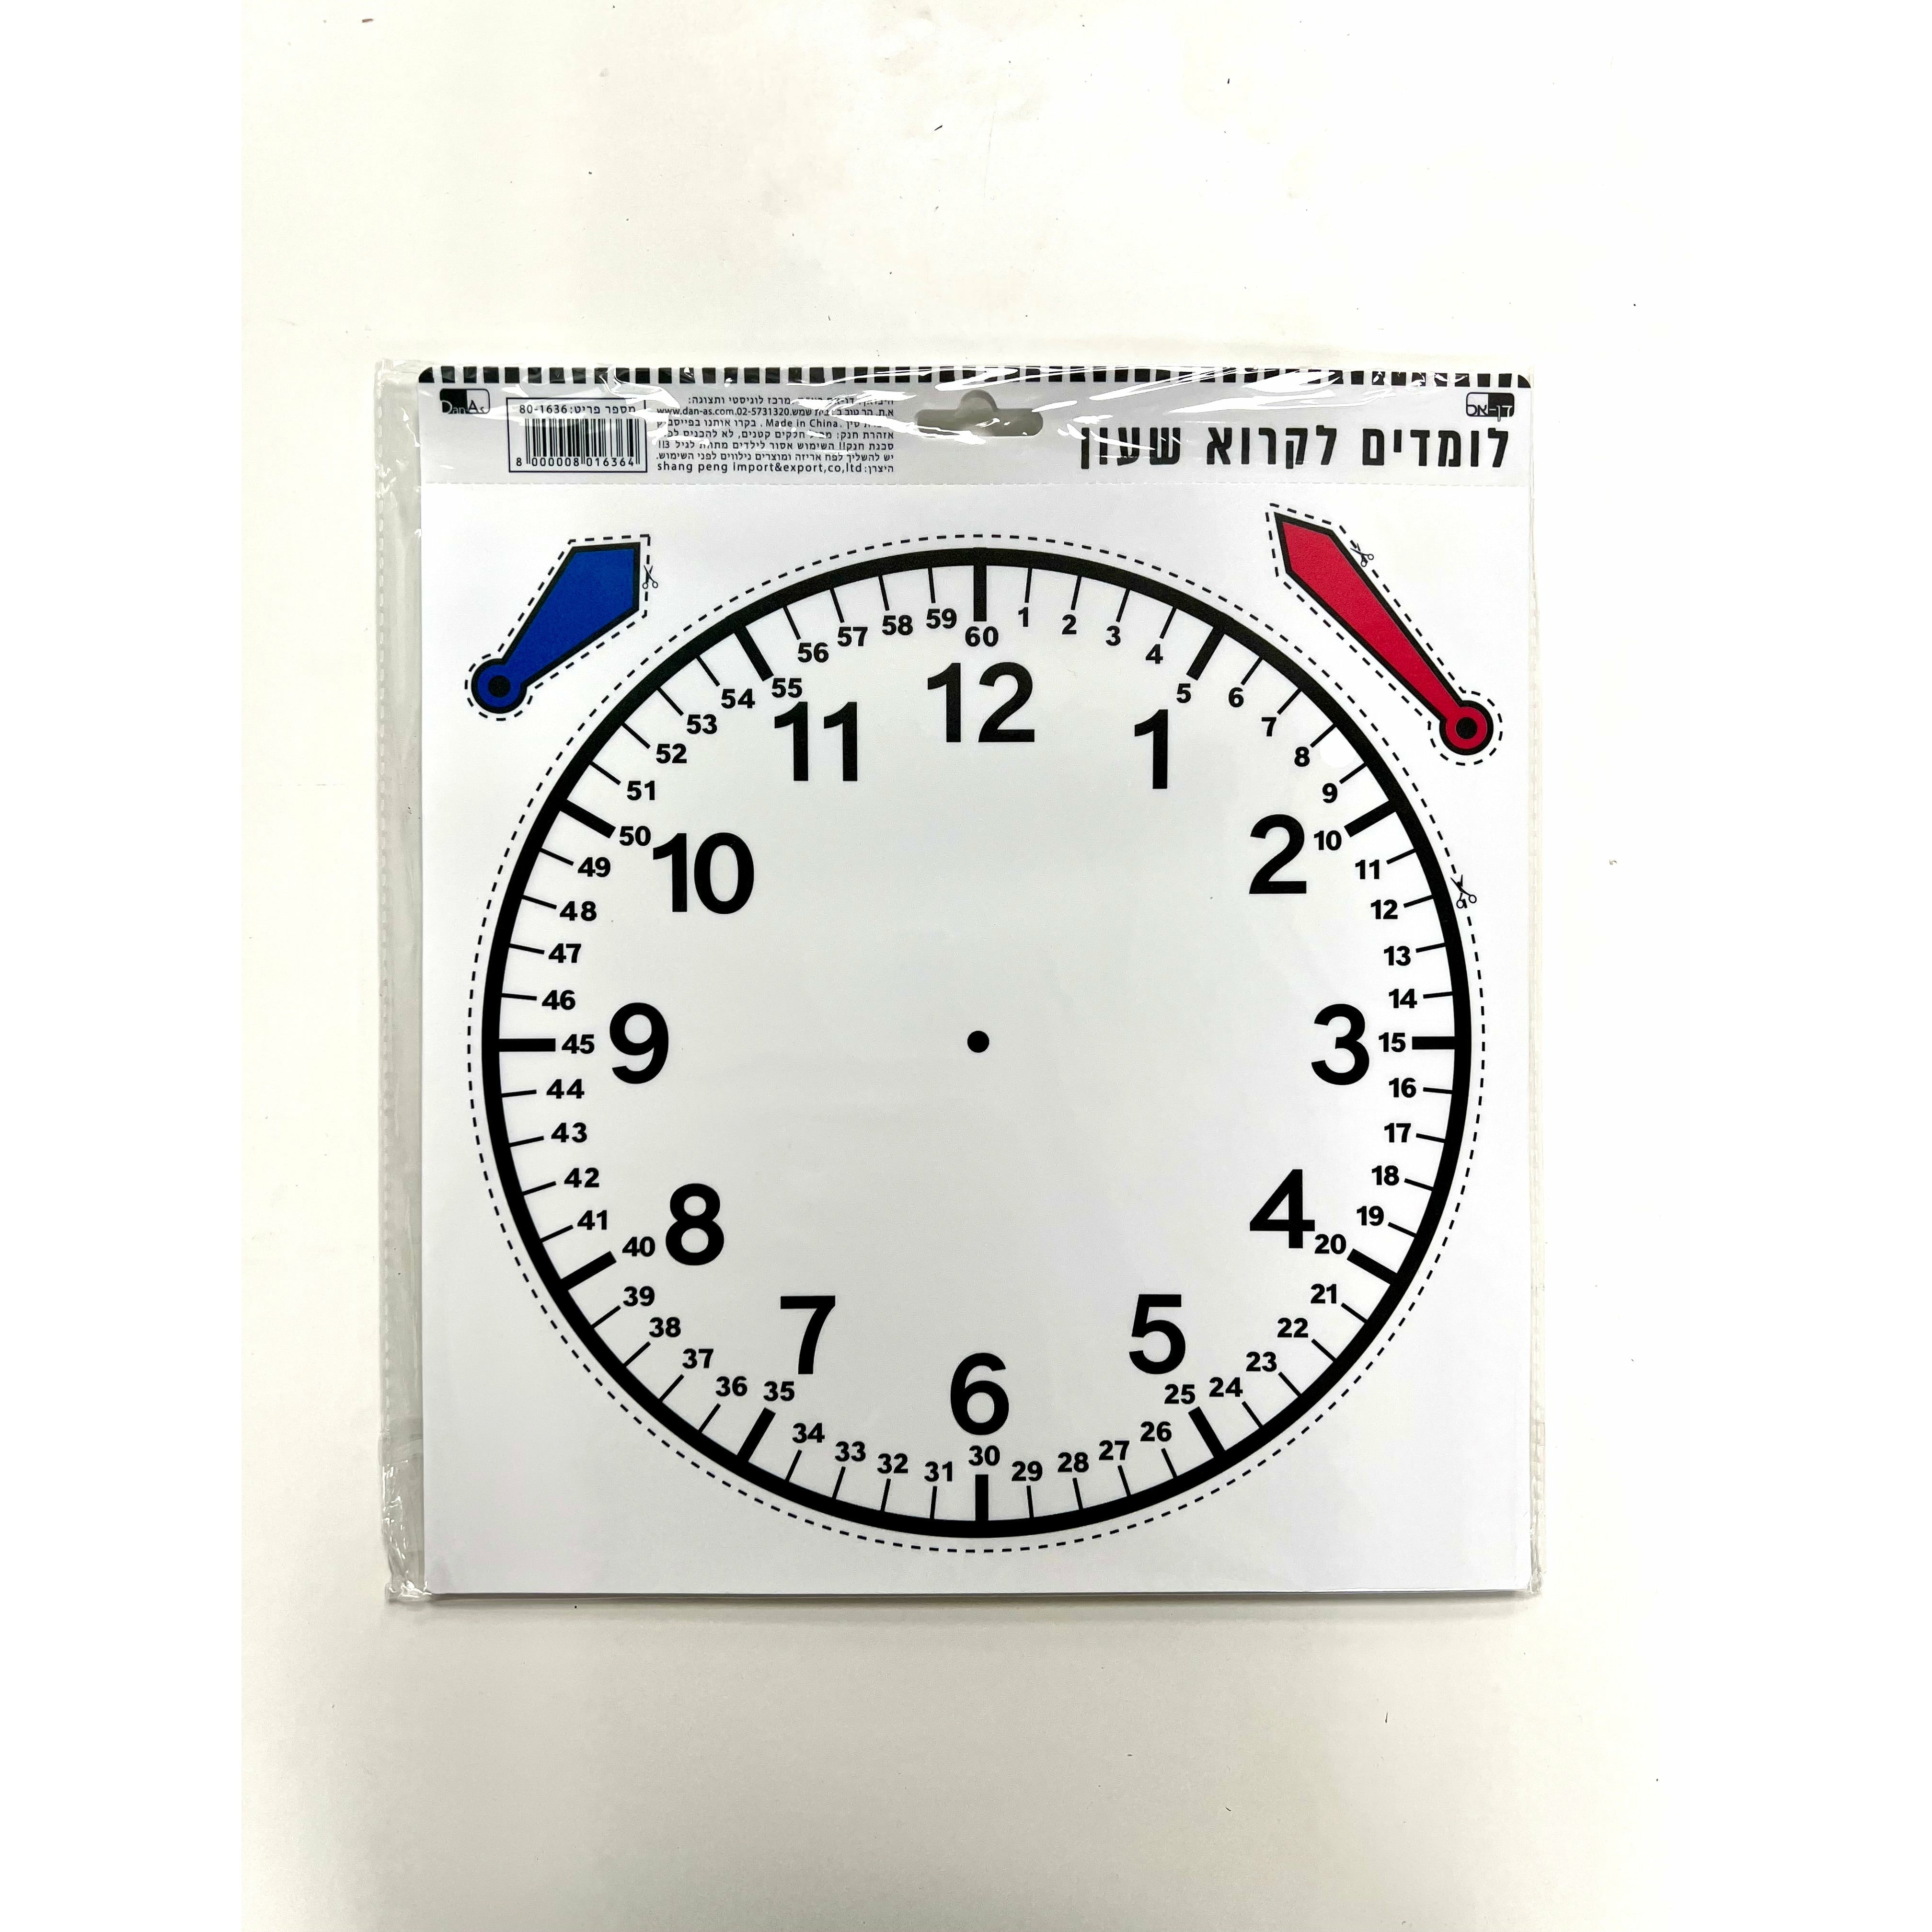 Learn To Tell Time Clock